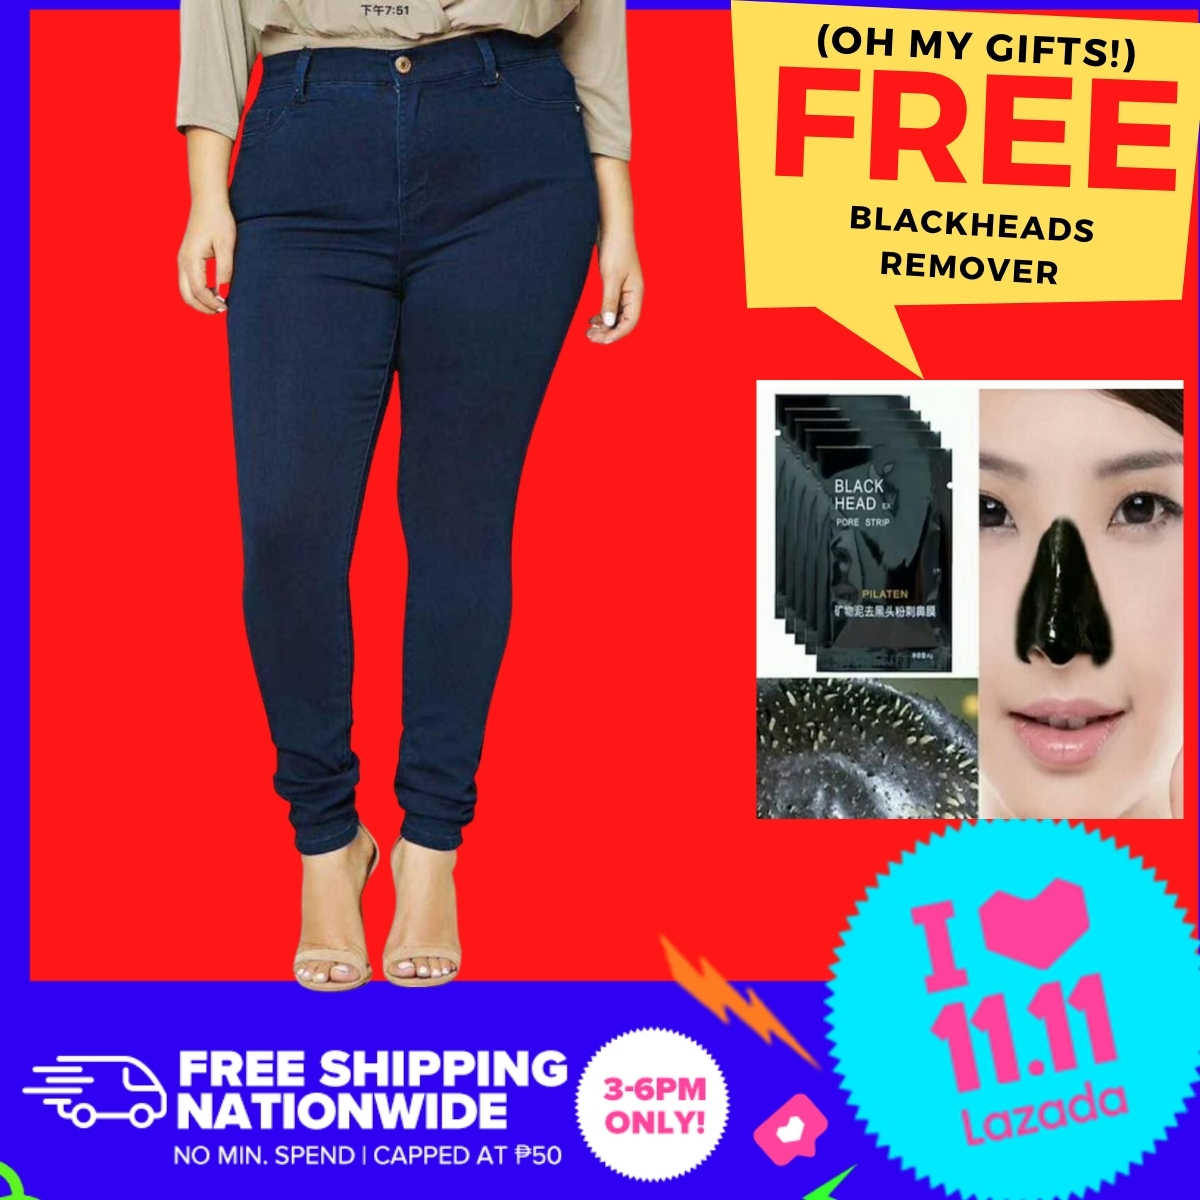 Branded High Waist Plus Size Ladies Pants (Size 30 - 36) for women on sale  with free facemask ** color may vary or differ due to monitor settings**  product color may slightly